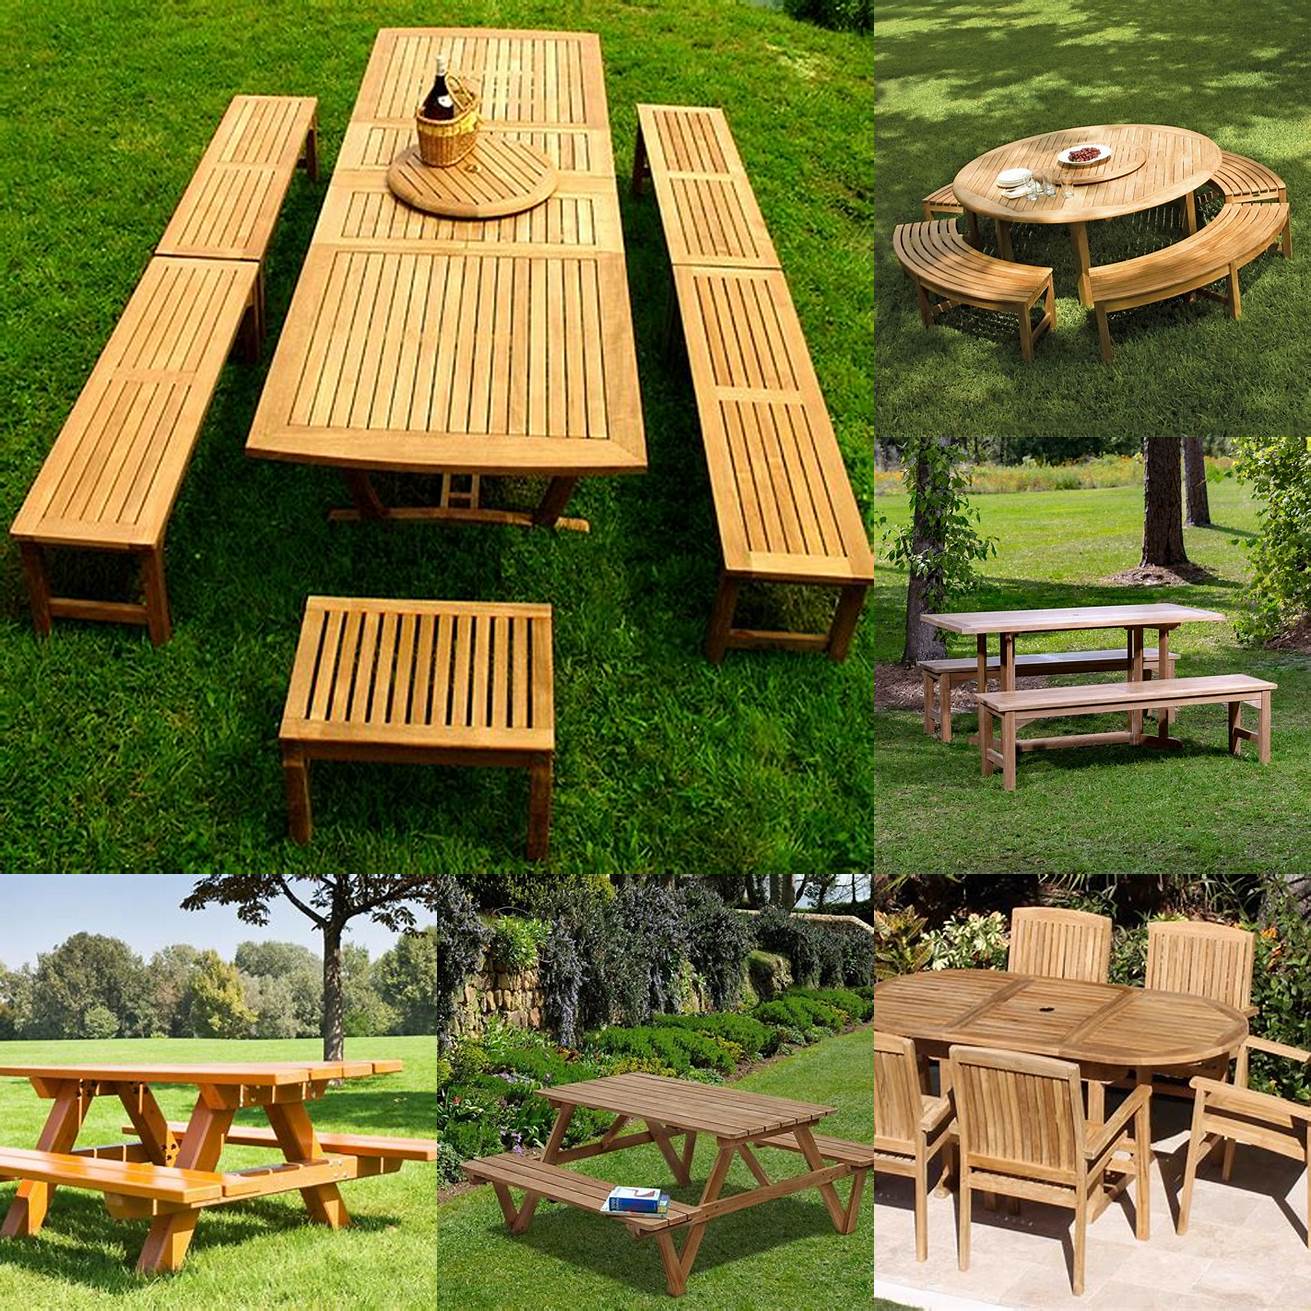 Teak Picnic Table and Benches With Ice Bucket